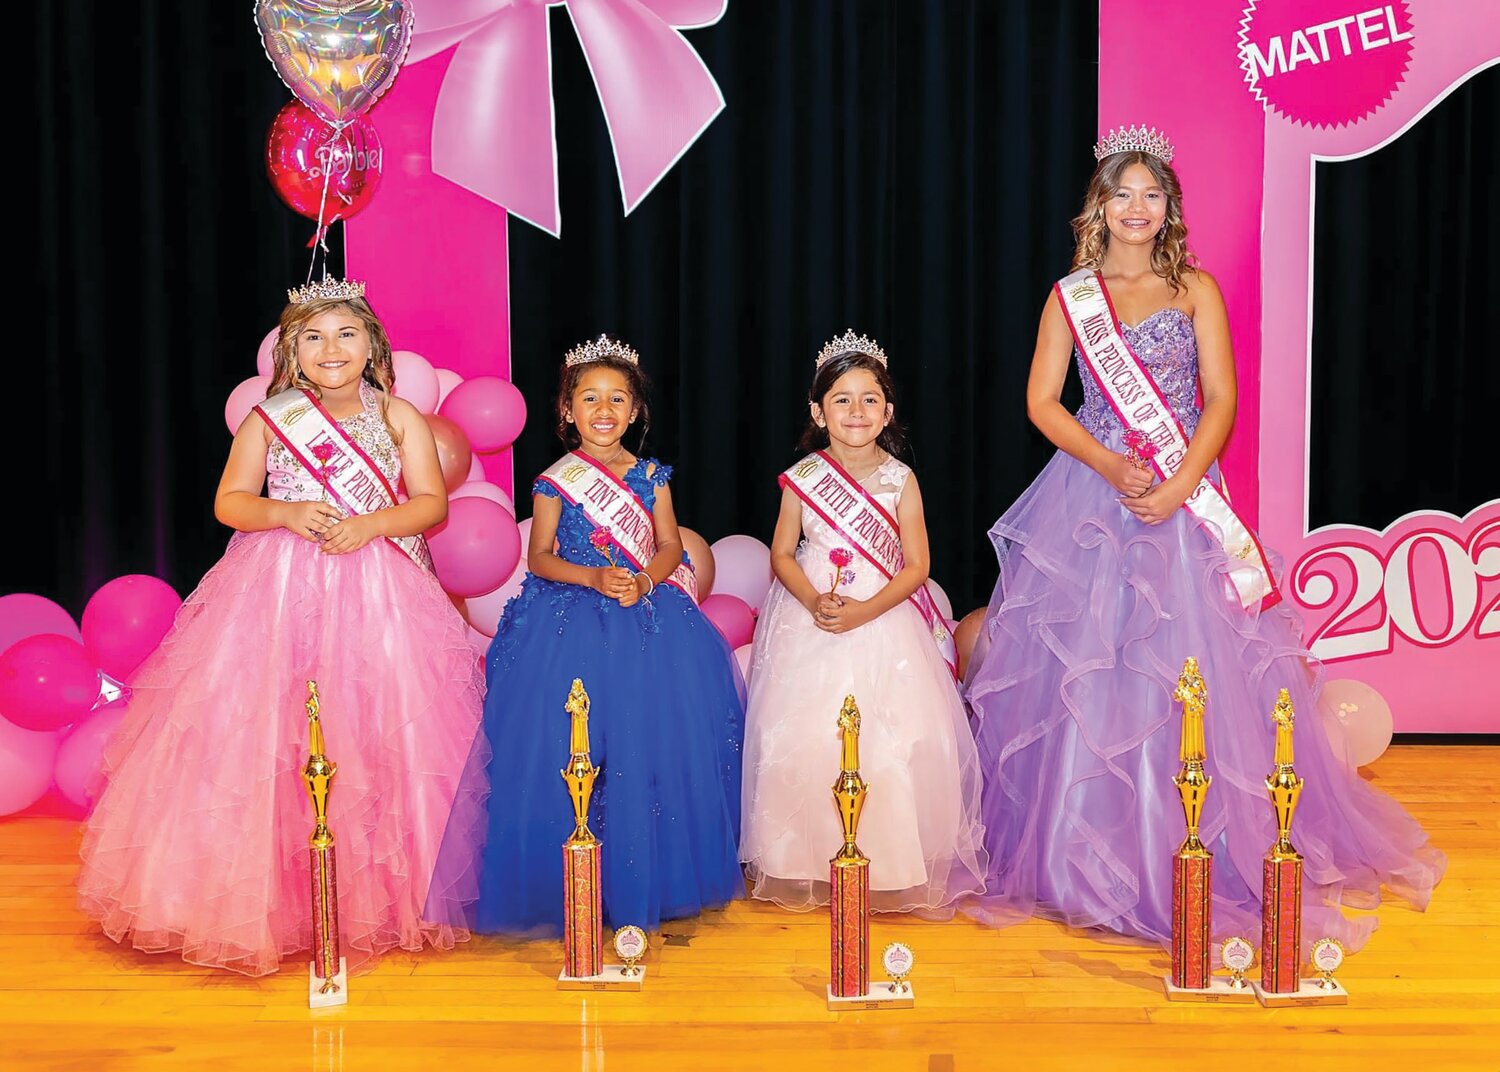 Left to right are: 2024 Little Princess of the Glades Zoey Branaman, Tiny Princess of the Glades Connie Holligan, Petite Princess of the Glades Mila Margarito was crowned, and the 2024 Miss Princess of the Glades Kaylianne Vanerbaan. [Photo by Brenda Whitehead Photography]